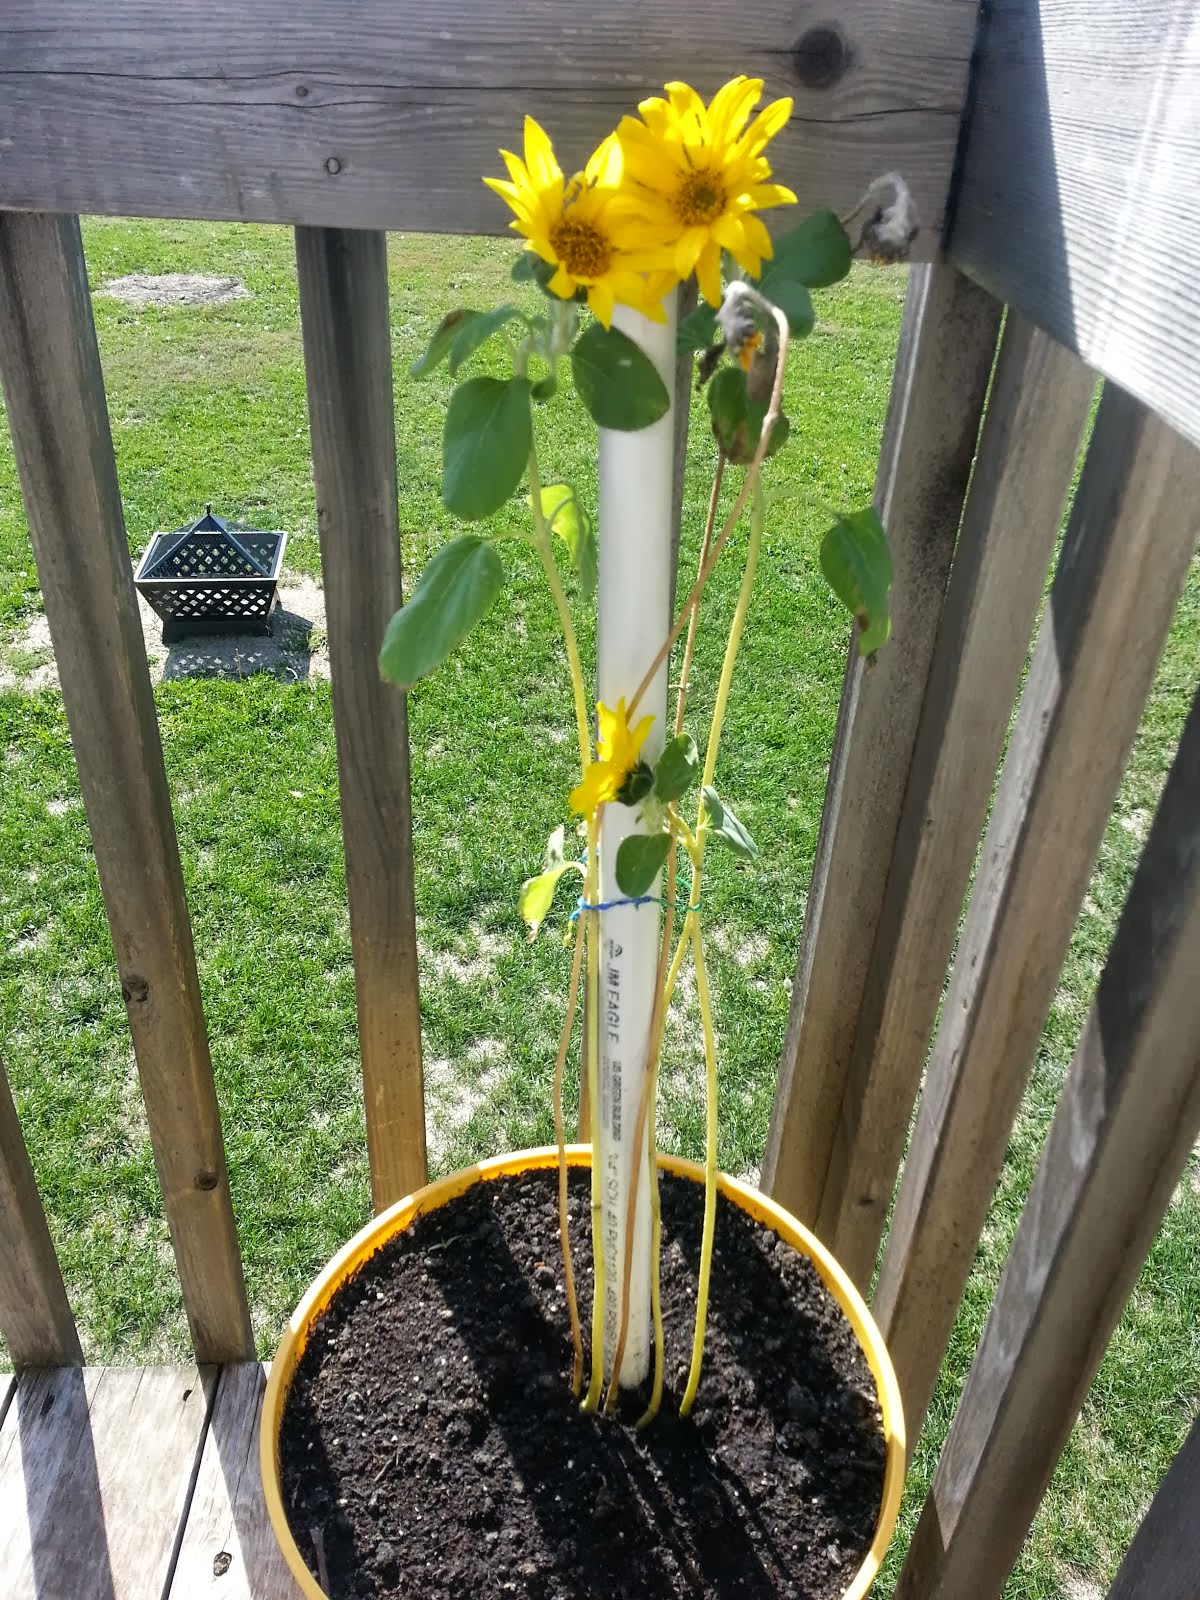 Look at Landon's FIRST DAY flower!!!